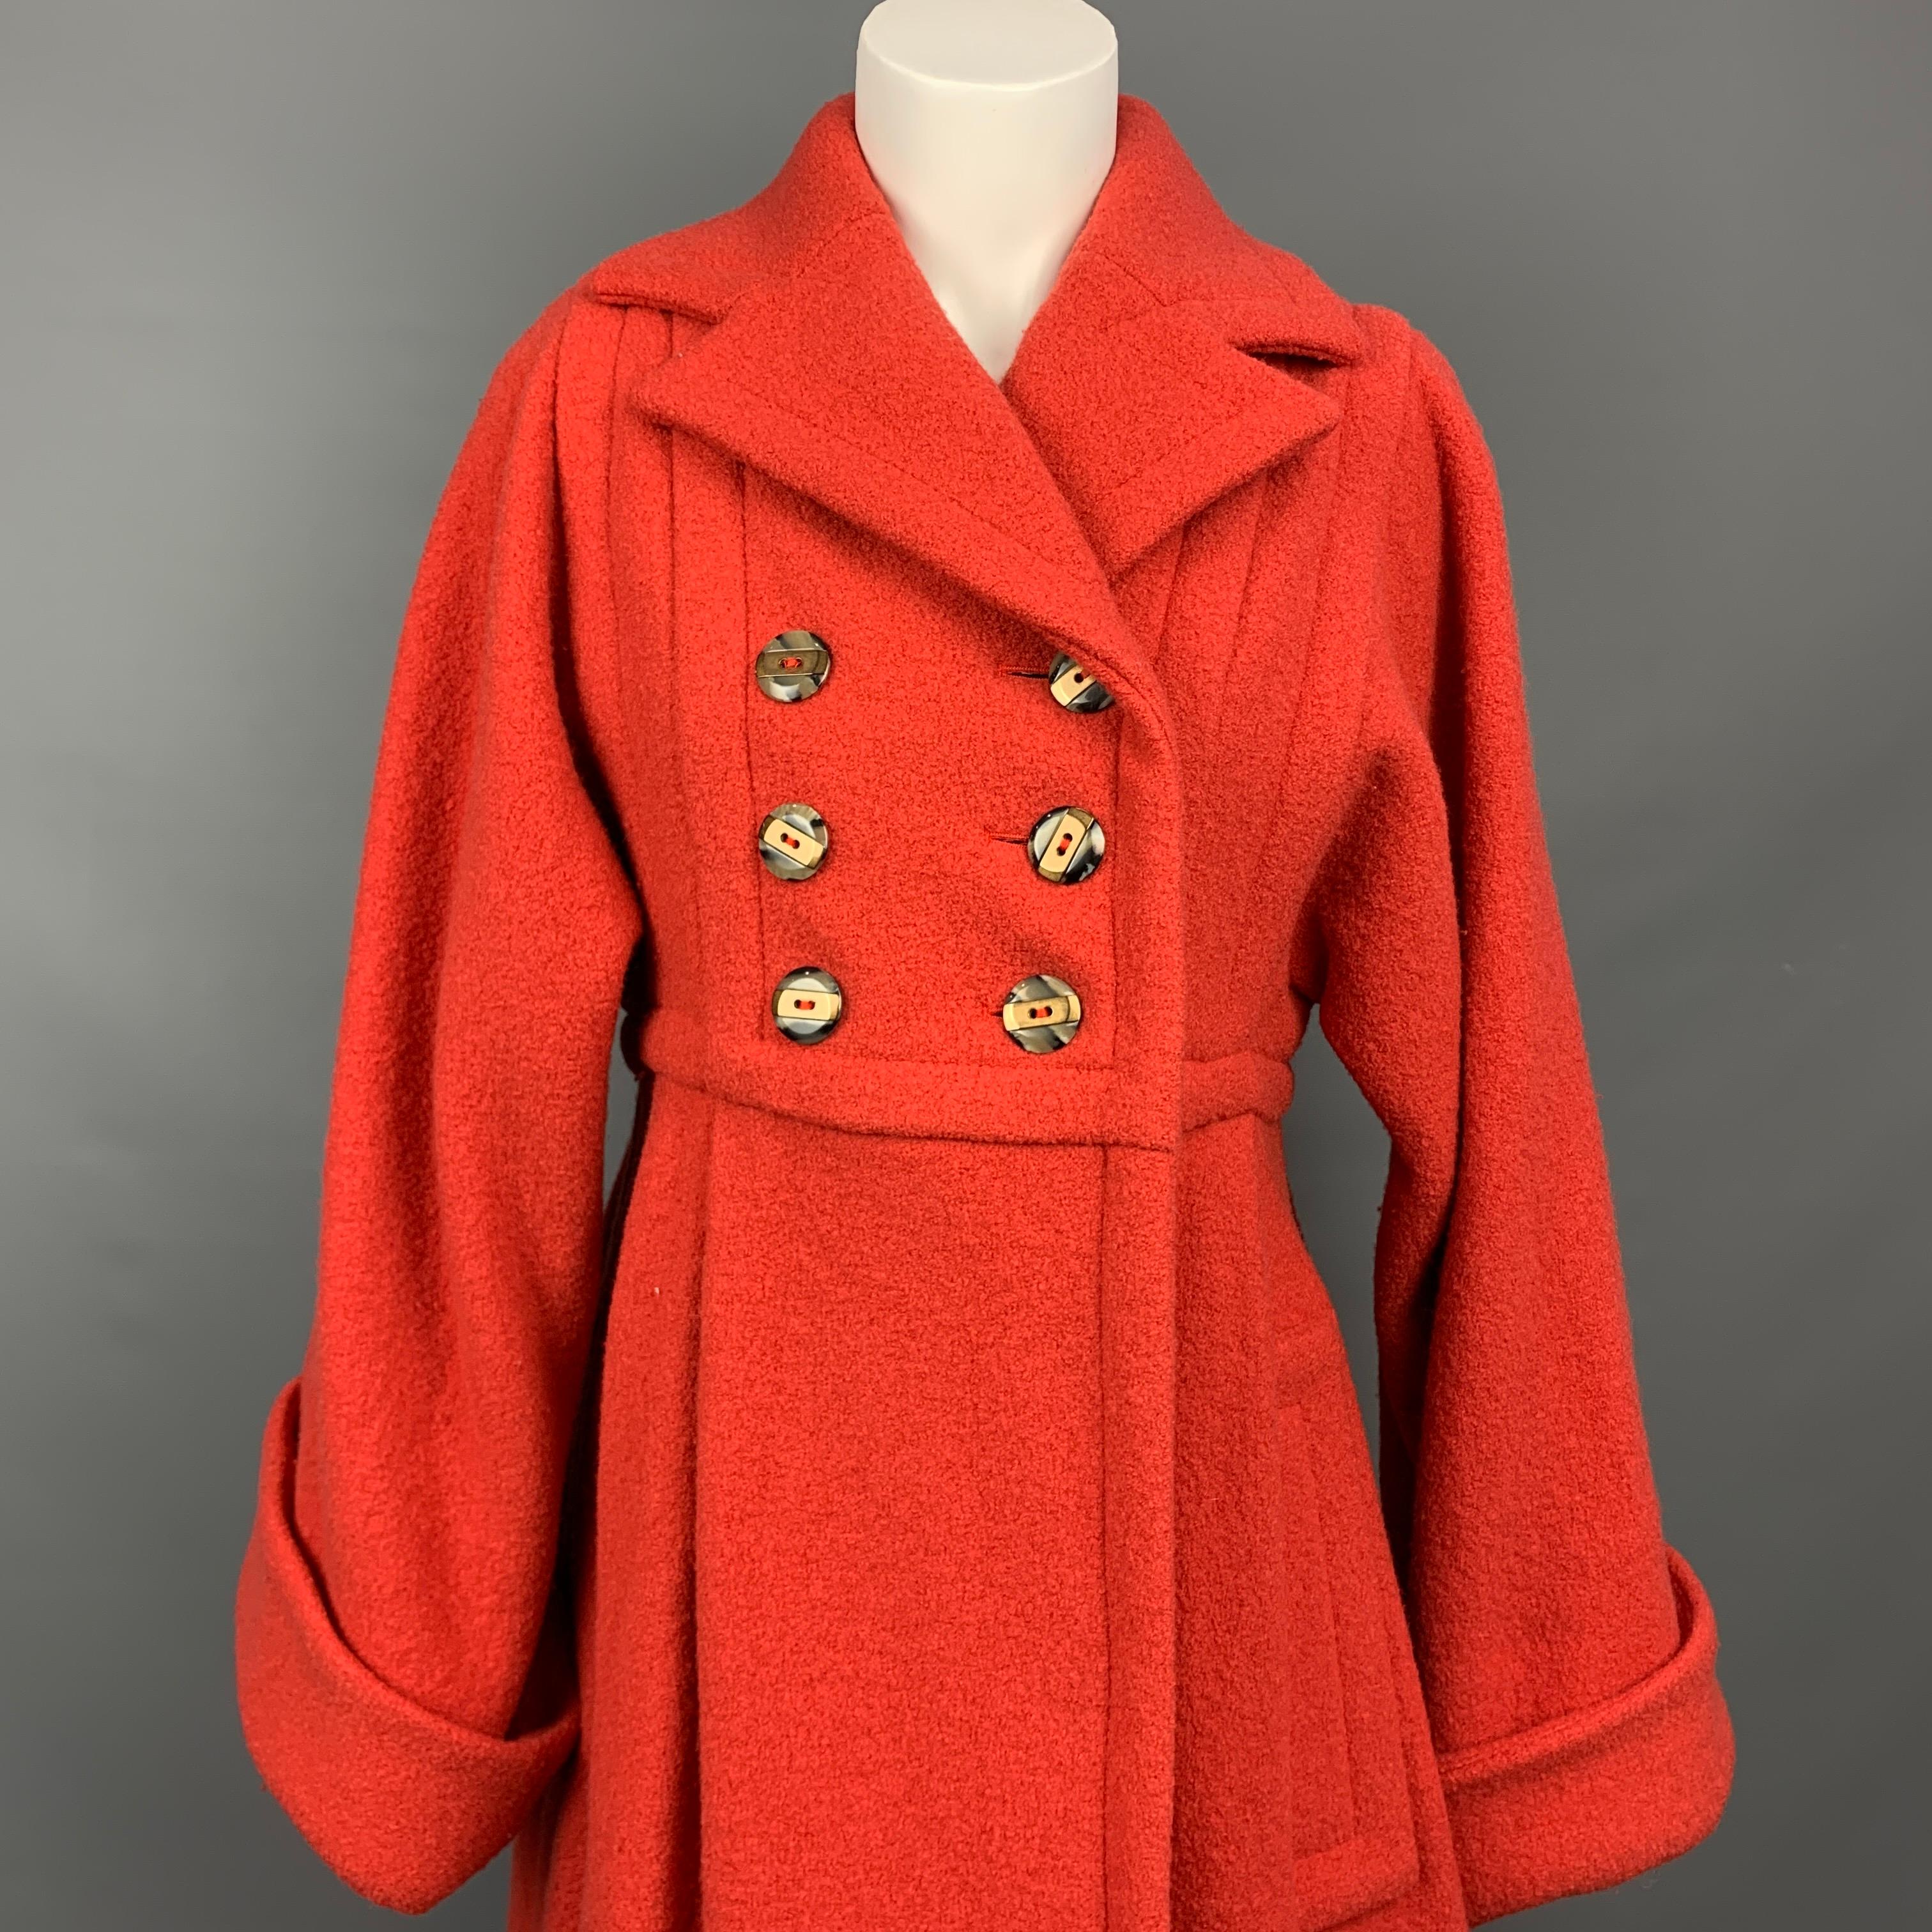 MARC by MARC JACOBS coat comes in a orange wool featuring a notch lapel, slit pockets, wide sleeves, and a double breasted closure. 

Very Good Pre-Owned Condition.
Marked: S

Measurements:

Shoulder: 14 in.
Bust: 36 in.
Sleeve: 28 in.
Length: 40